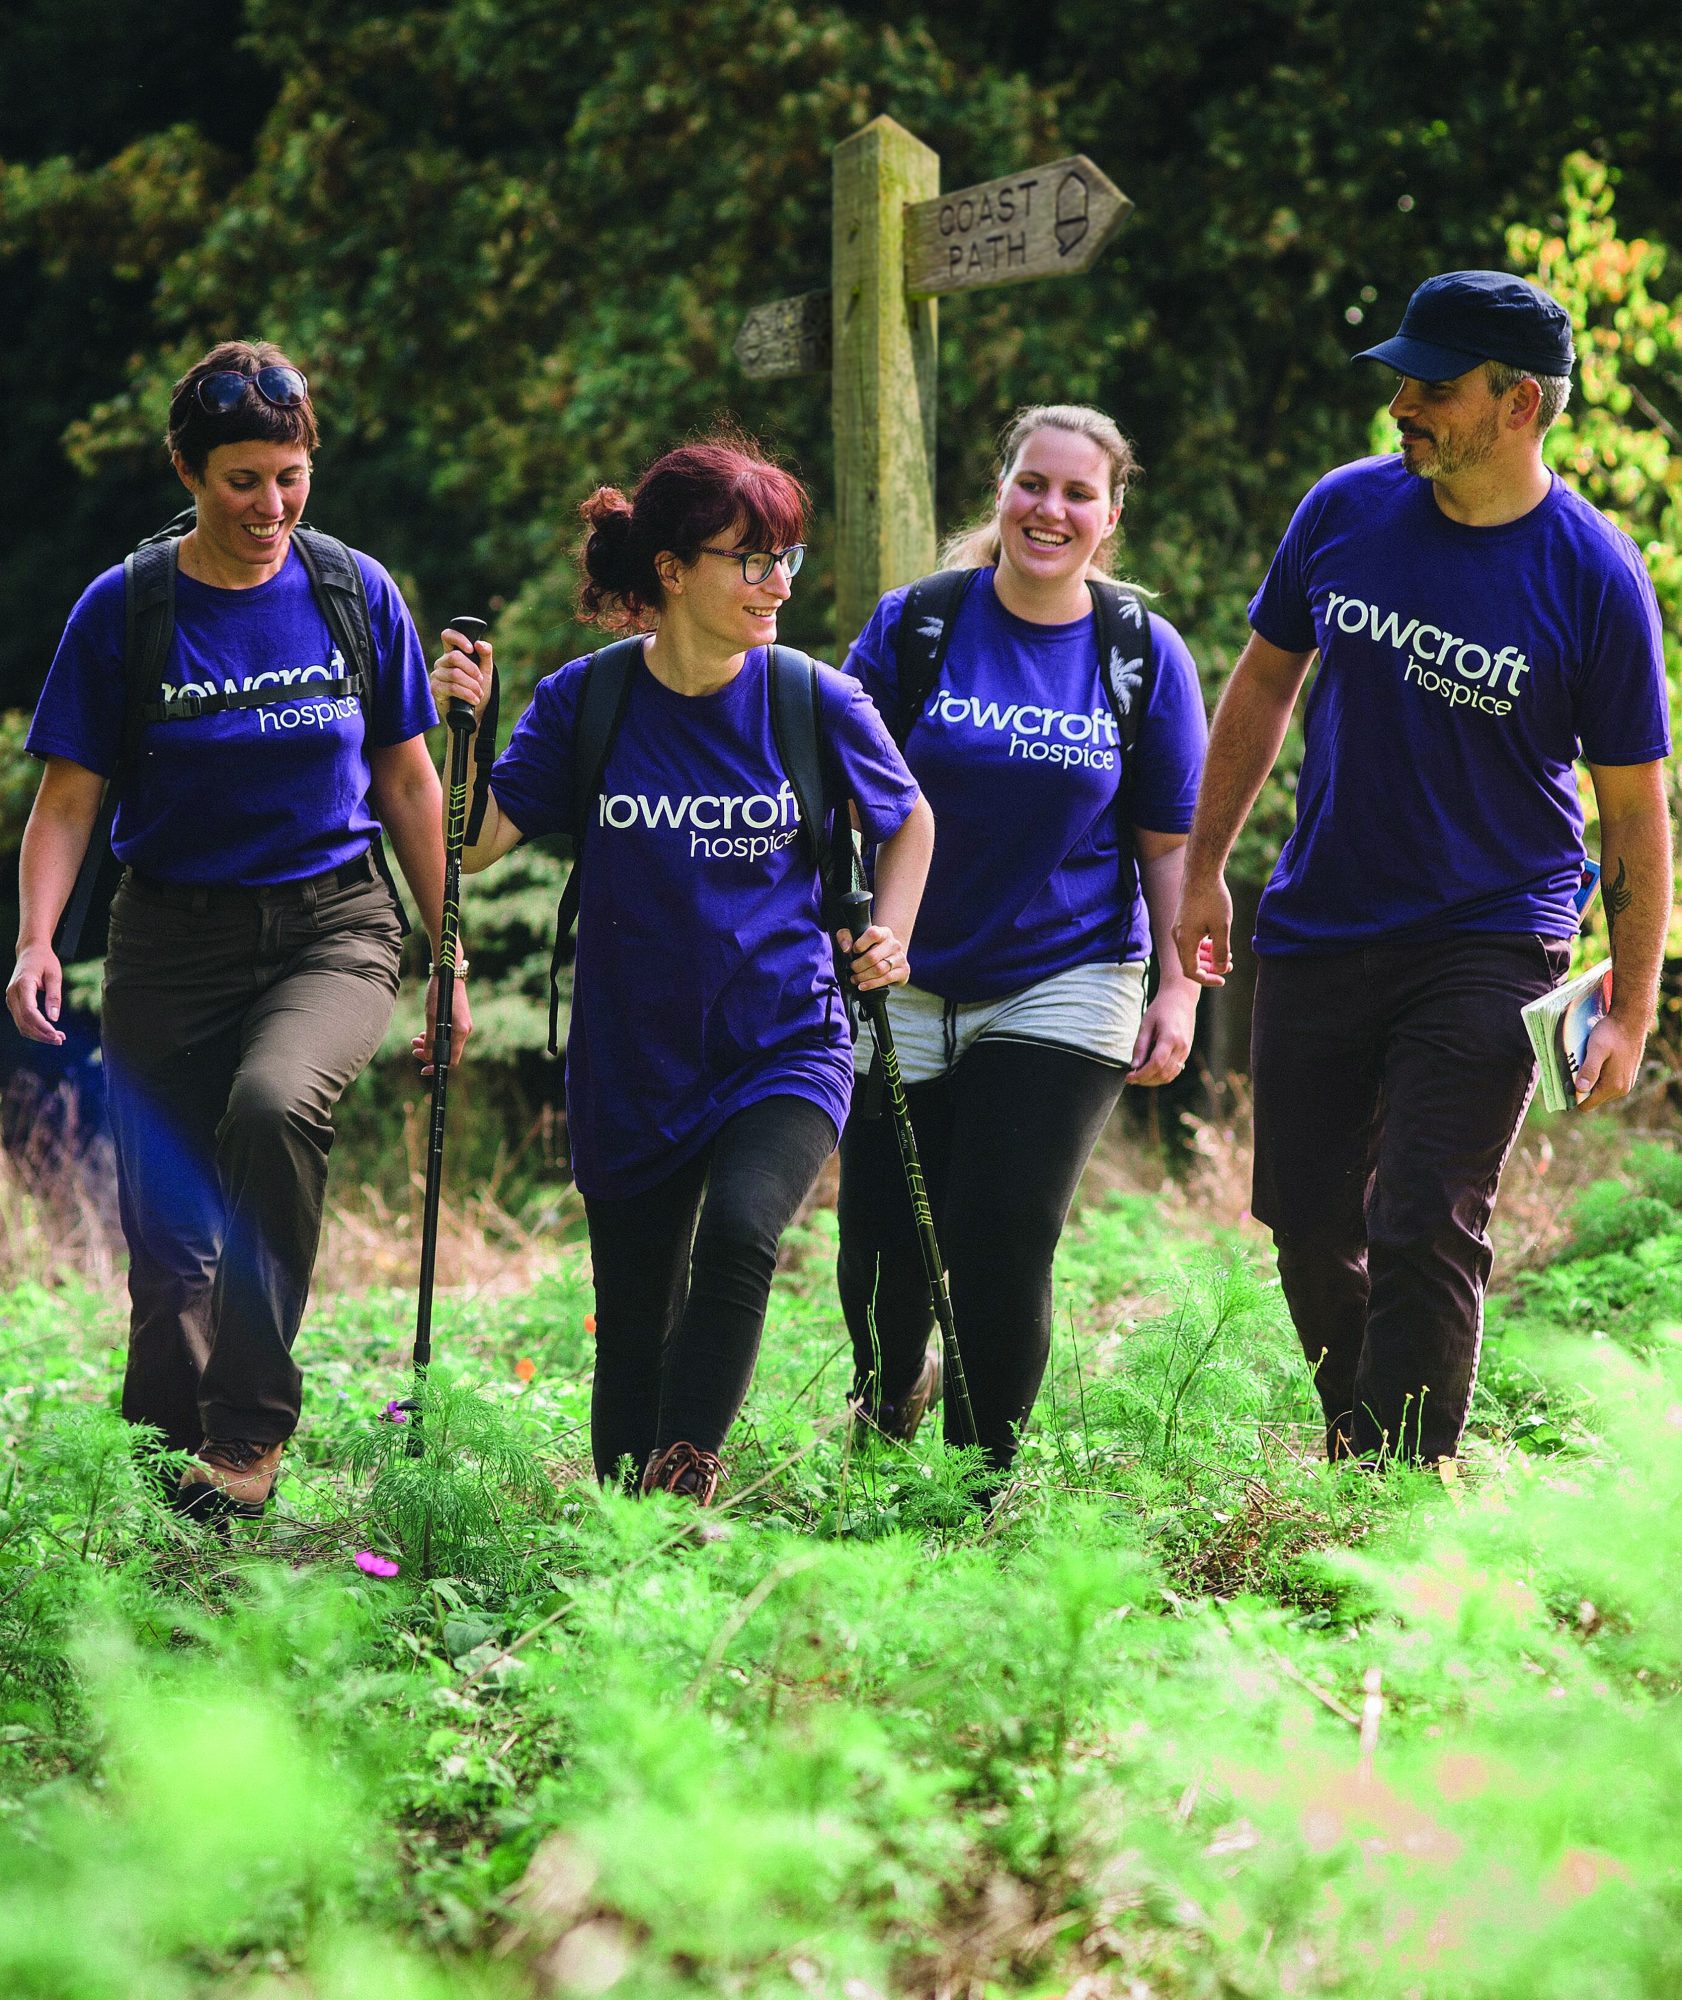 Some Rowcroft fundraisers are seen in purple branded t-shirts with hiking equipment in their hands.